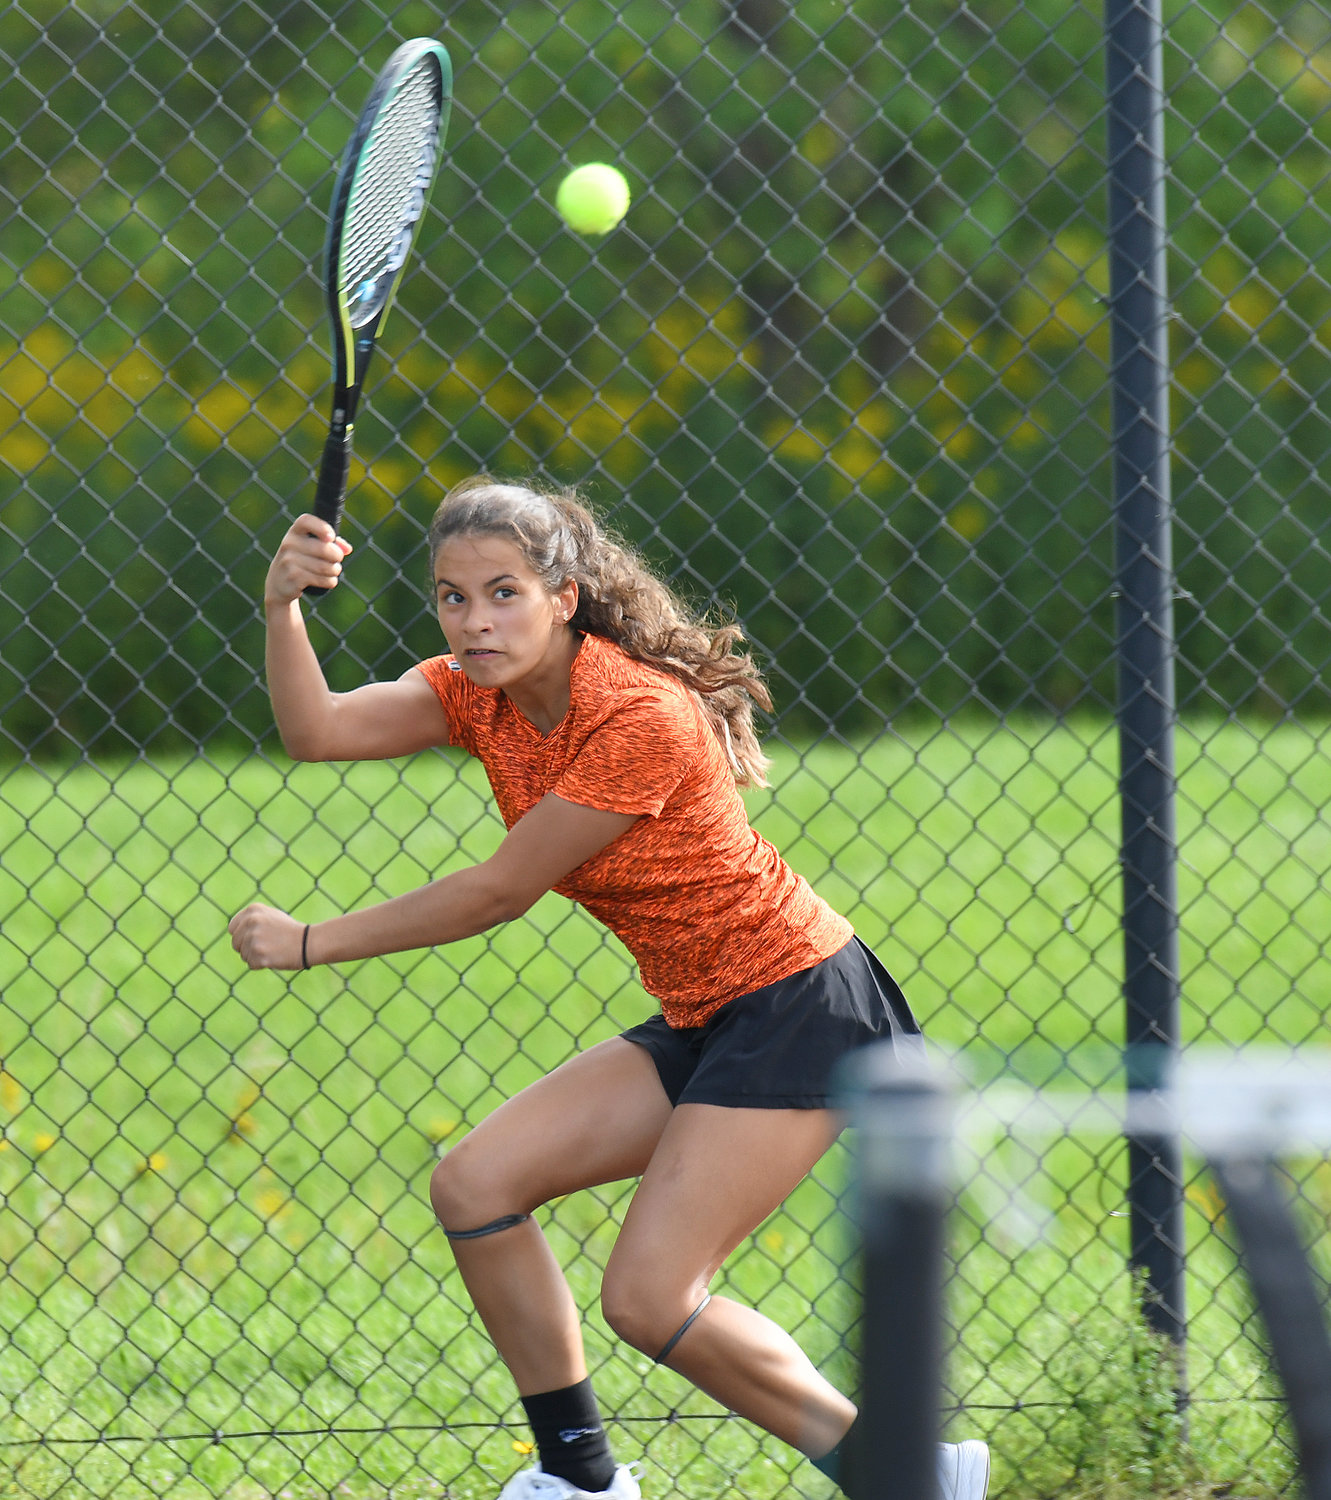 Rome Free Academy first singles player Jenna Cianfrocco returns a shot during her match Wednesday at home against Utica-Proctor’s Tha Kyet. She lost the match and the Black Knights lost 4-3.